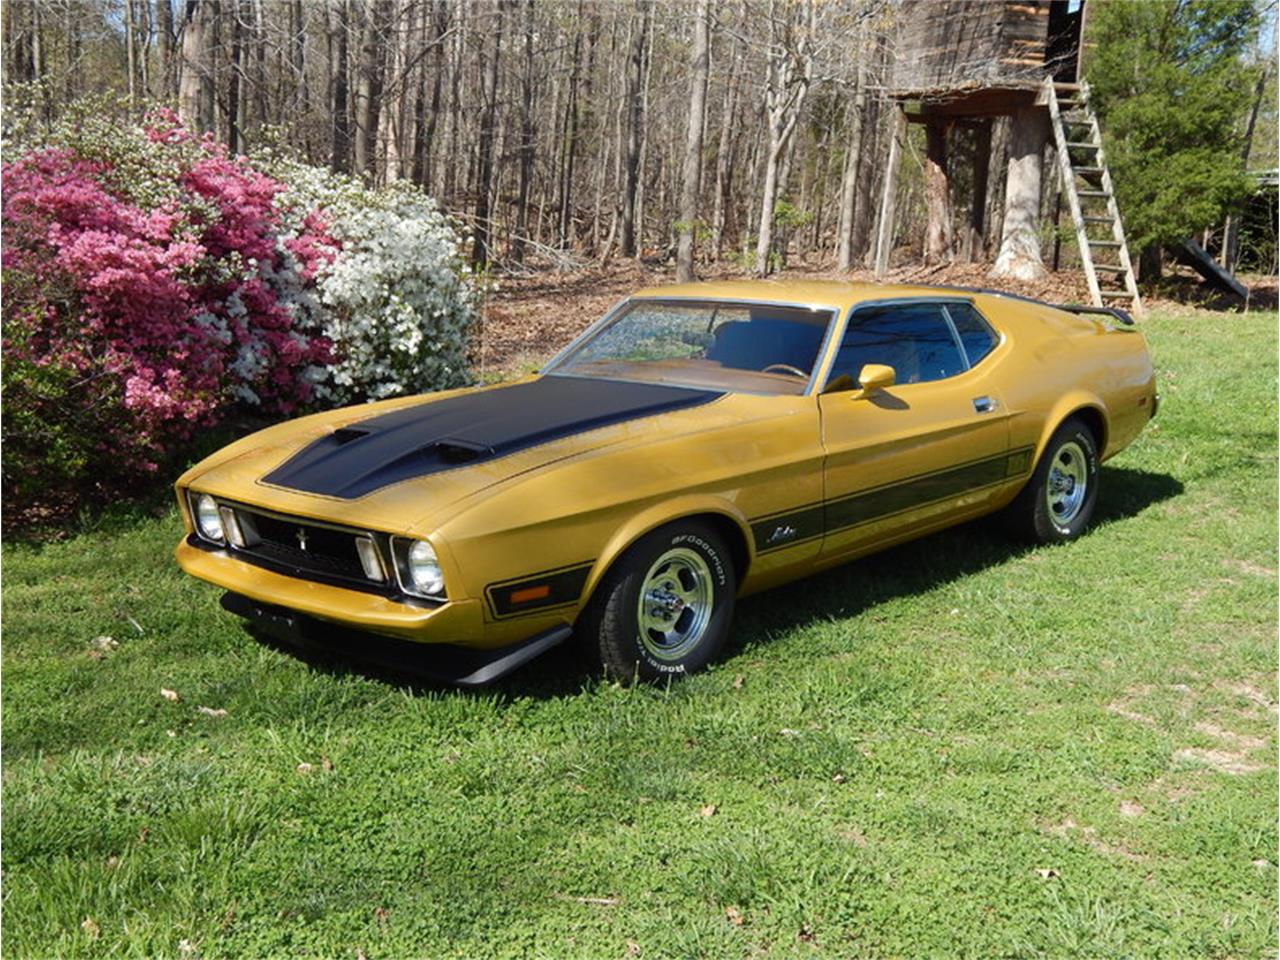 1973 Ford Mustang Mach 1 Cobra Jet for Sale | ClassicCars.com | CC-877798